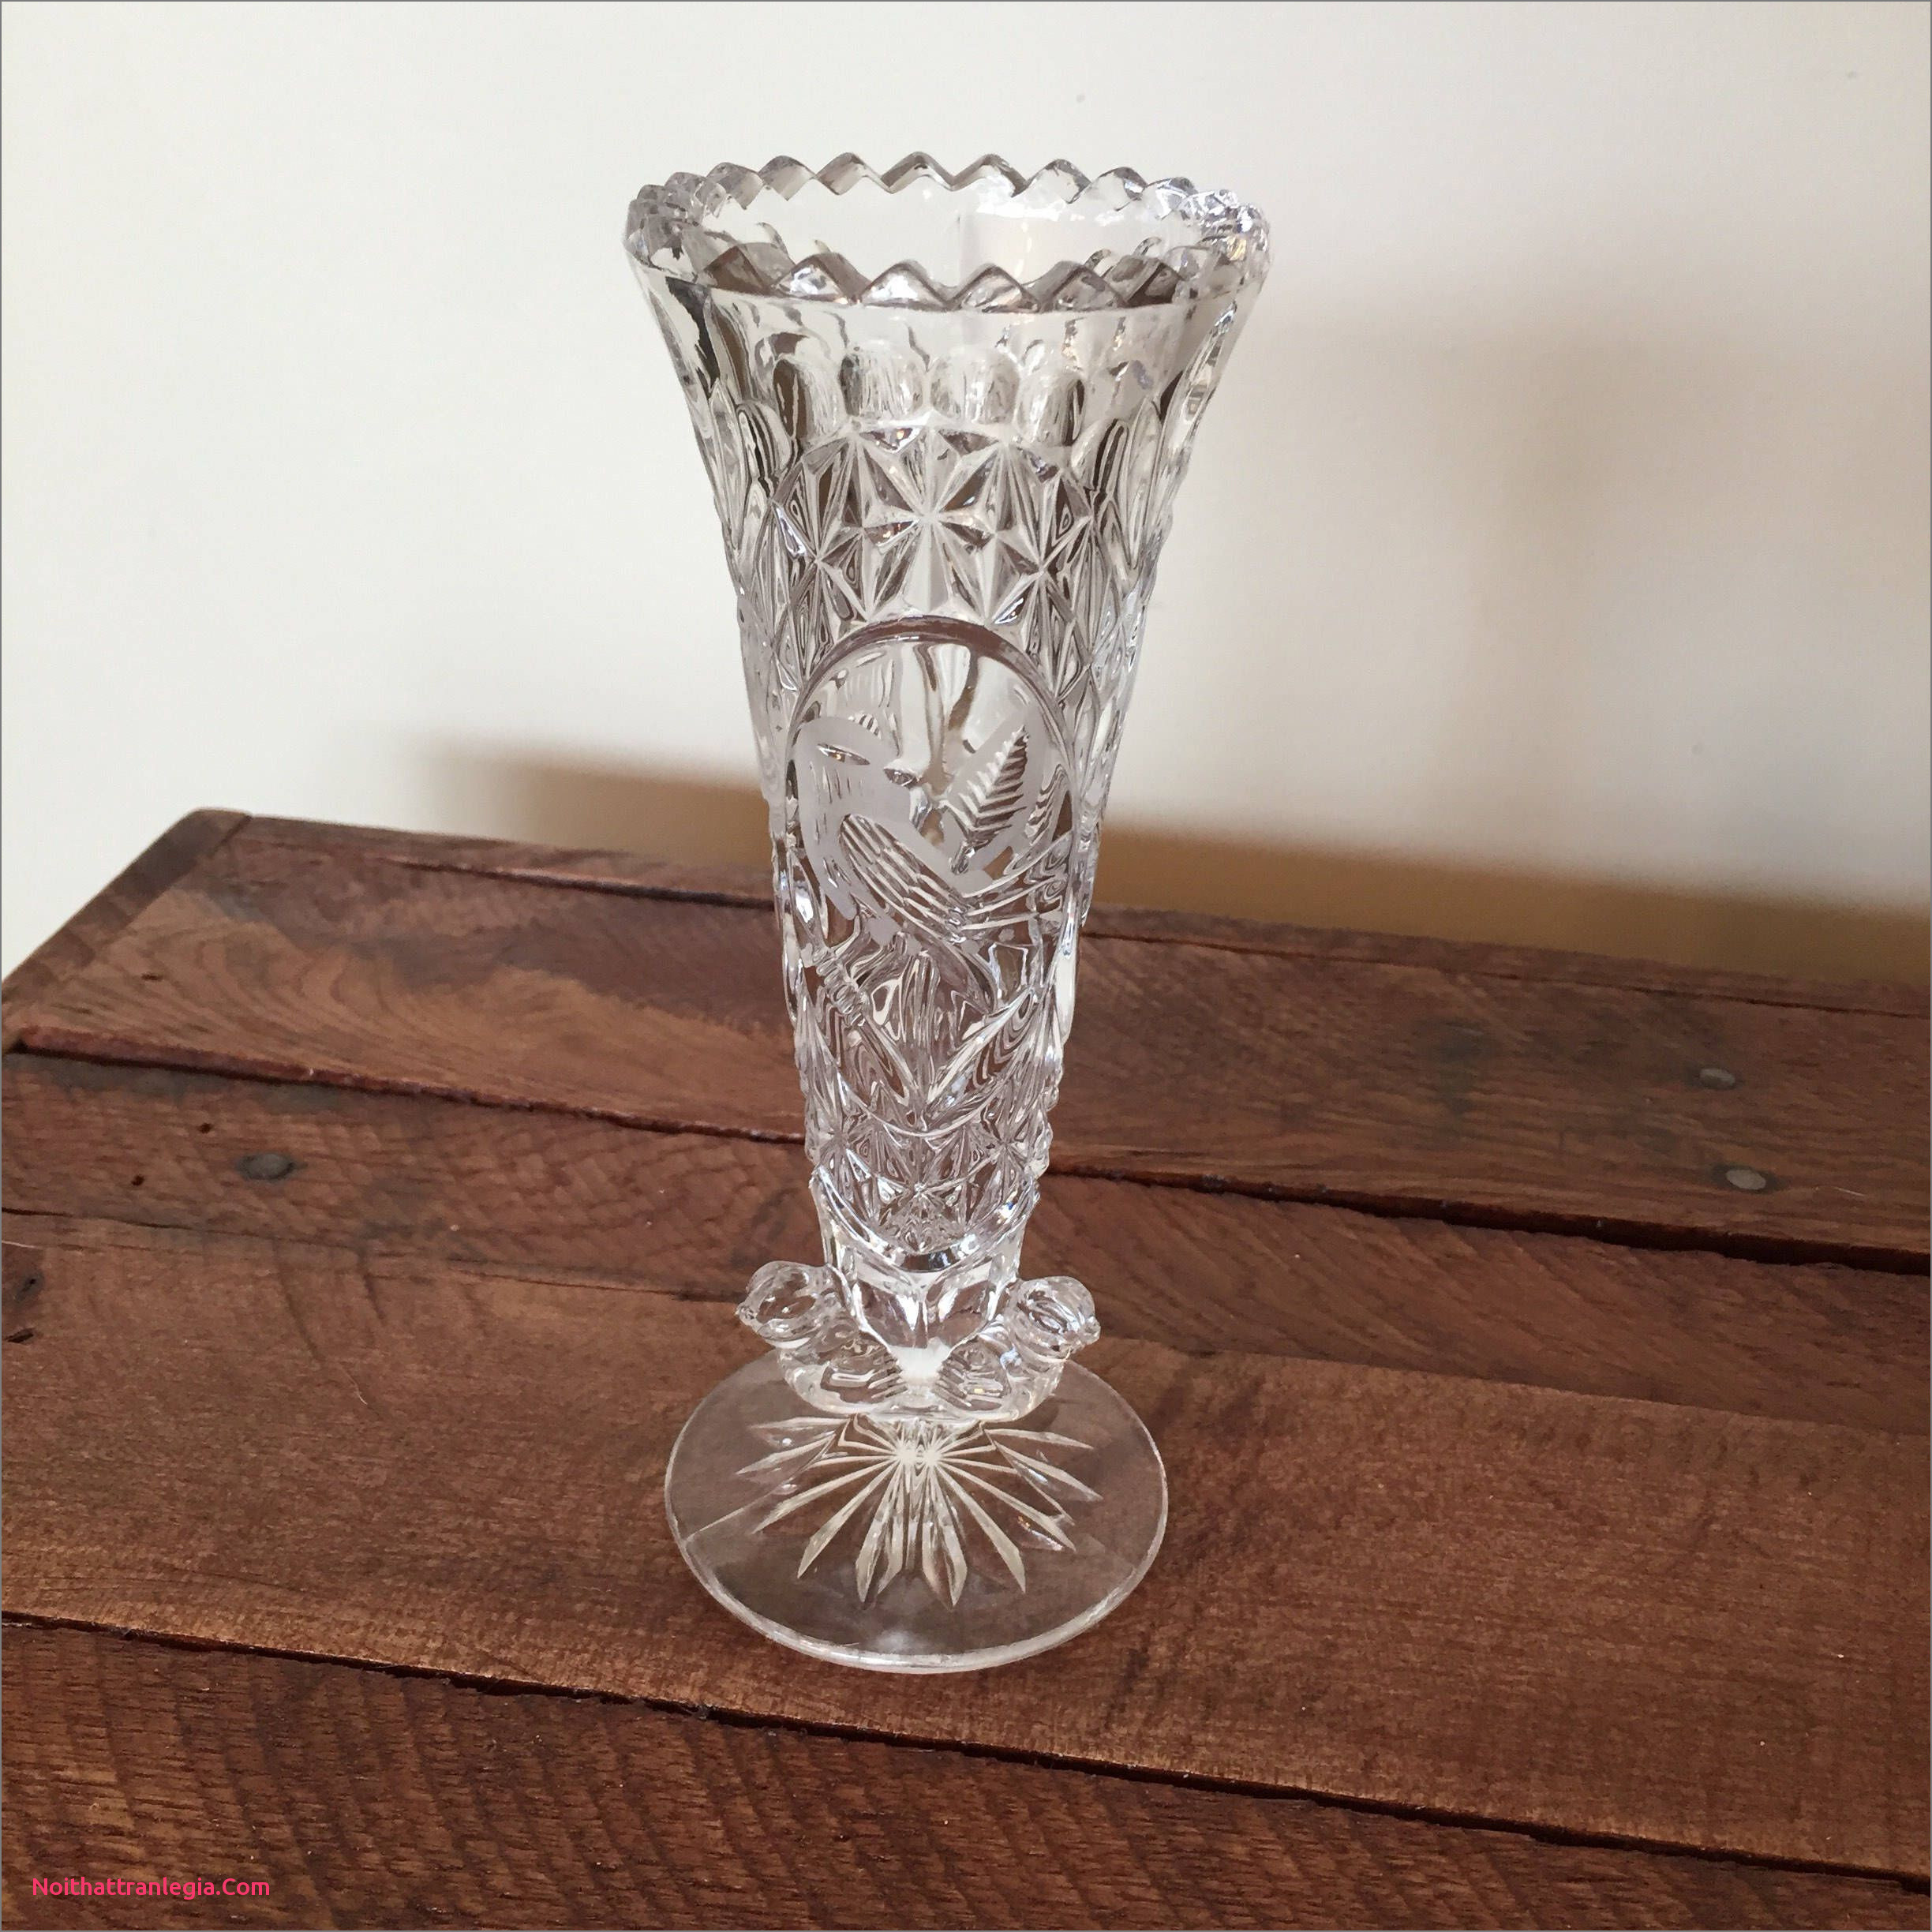 22 Recommended Footed Clear Glass Vase 2024 free download footed clear glass vase of 20 cut glass antique vase noithattranlegia vases design inside vintage cut glass bird vase etched glass vase three glass birds perched on vase crystal bird